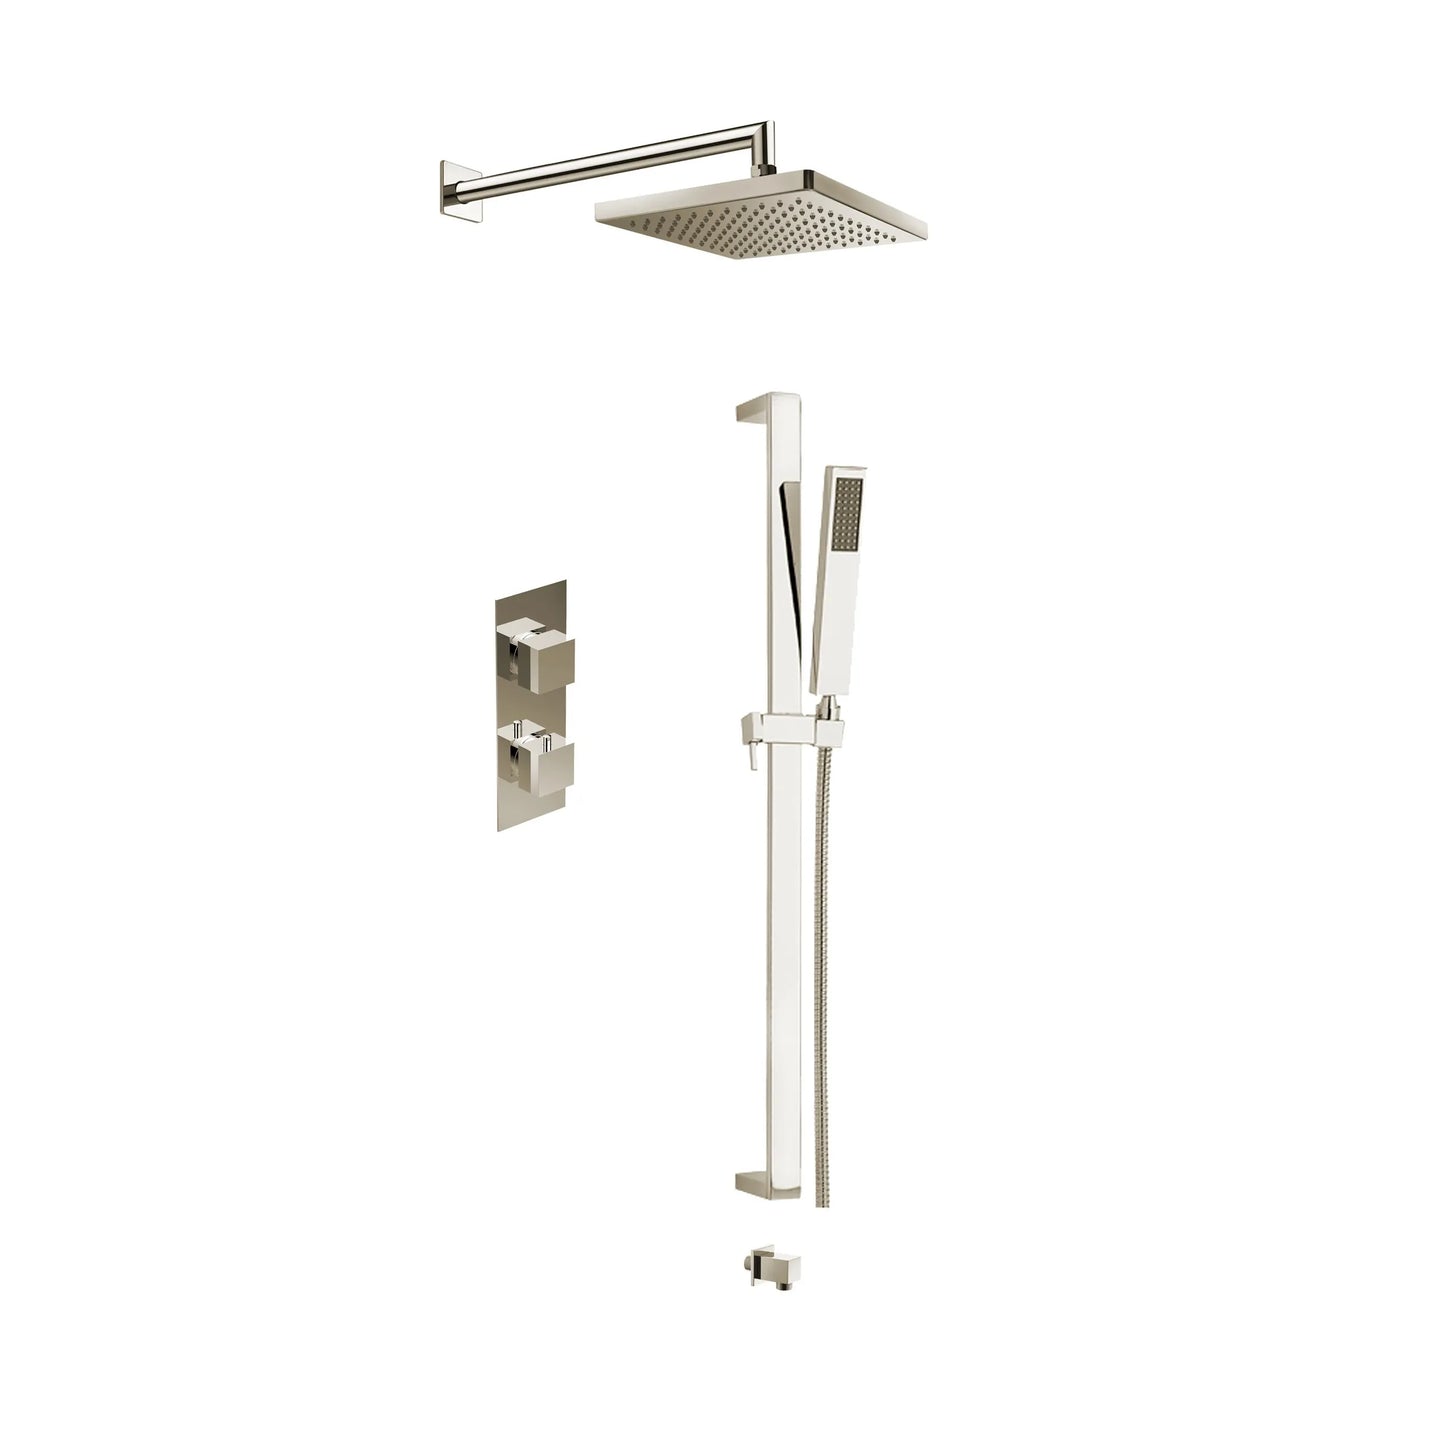 Aquadesign Products Shower Kit (System X11) - Polished Nickel